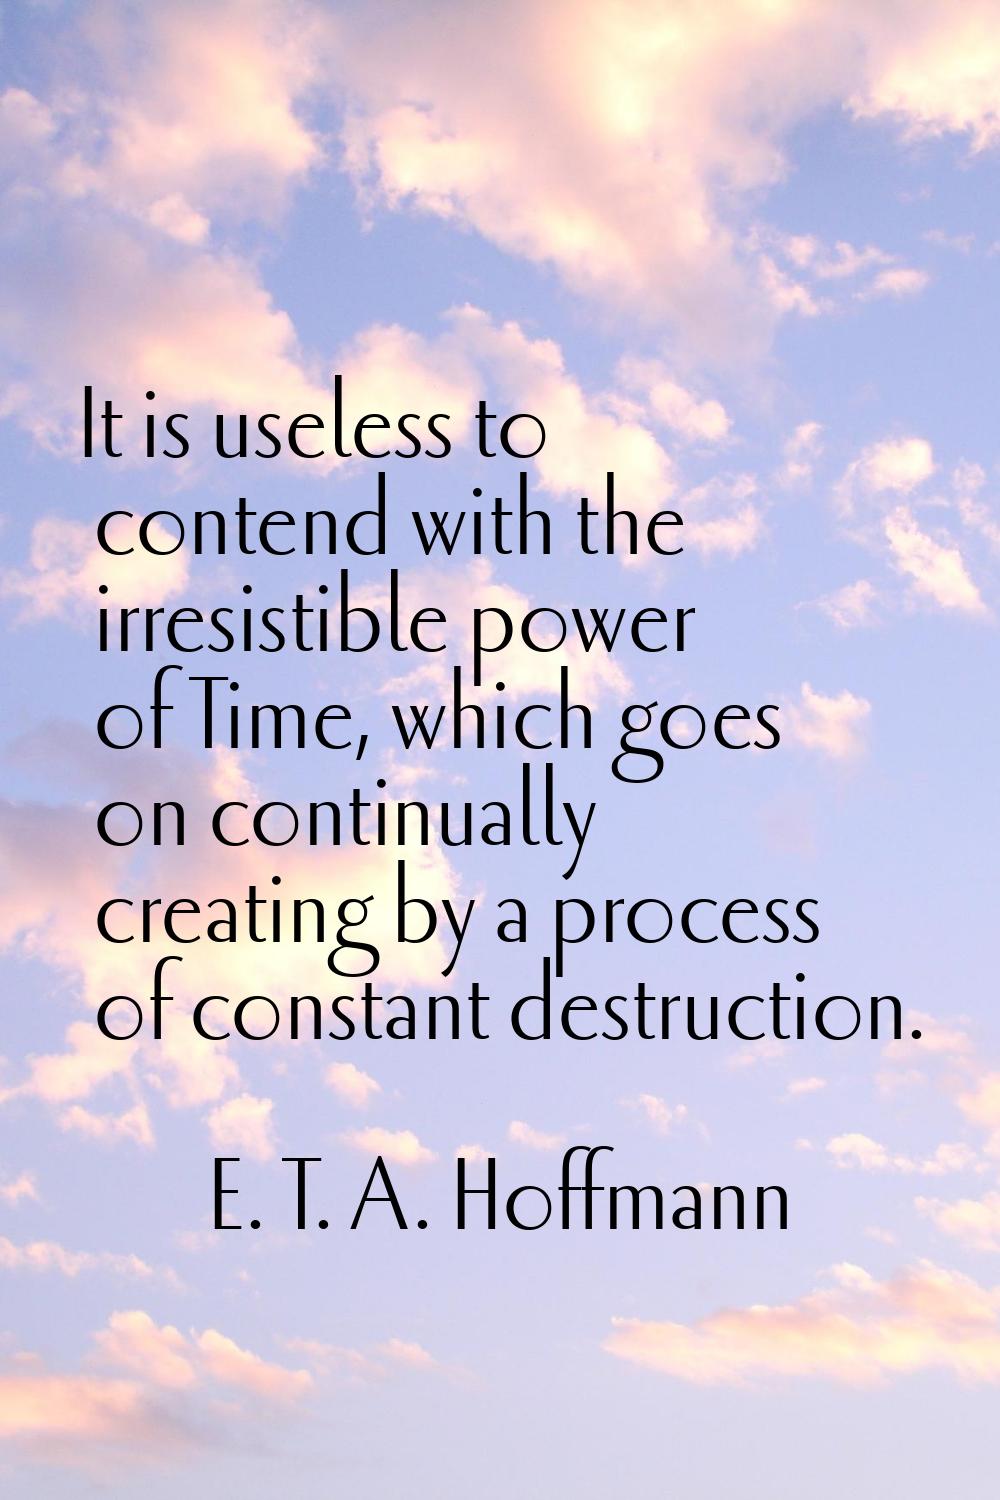 It is useless to contend with the irresistible power of Time, which goes on continually creating by